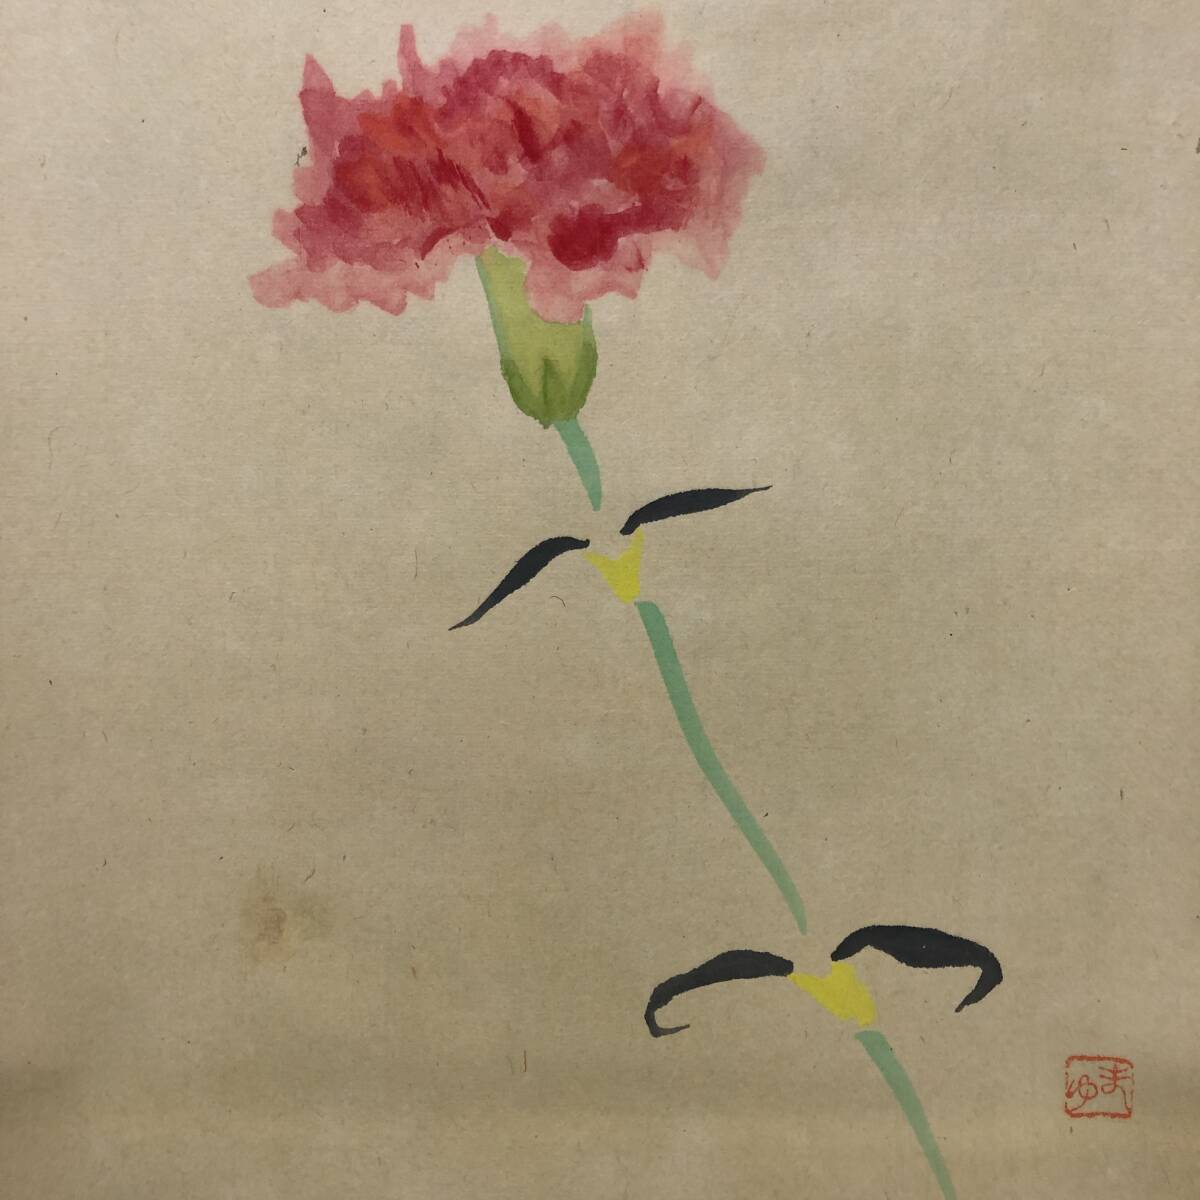 Reproduction // Mayumi / Carnation / Flower / Craft / Hotei-ya Hanging Scroll A-746, Painting, Japanese painting, Flowers and Birds, Wildlife